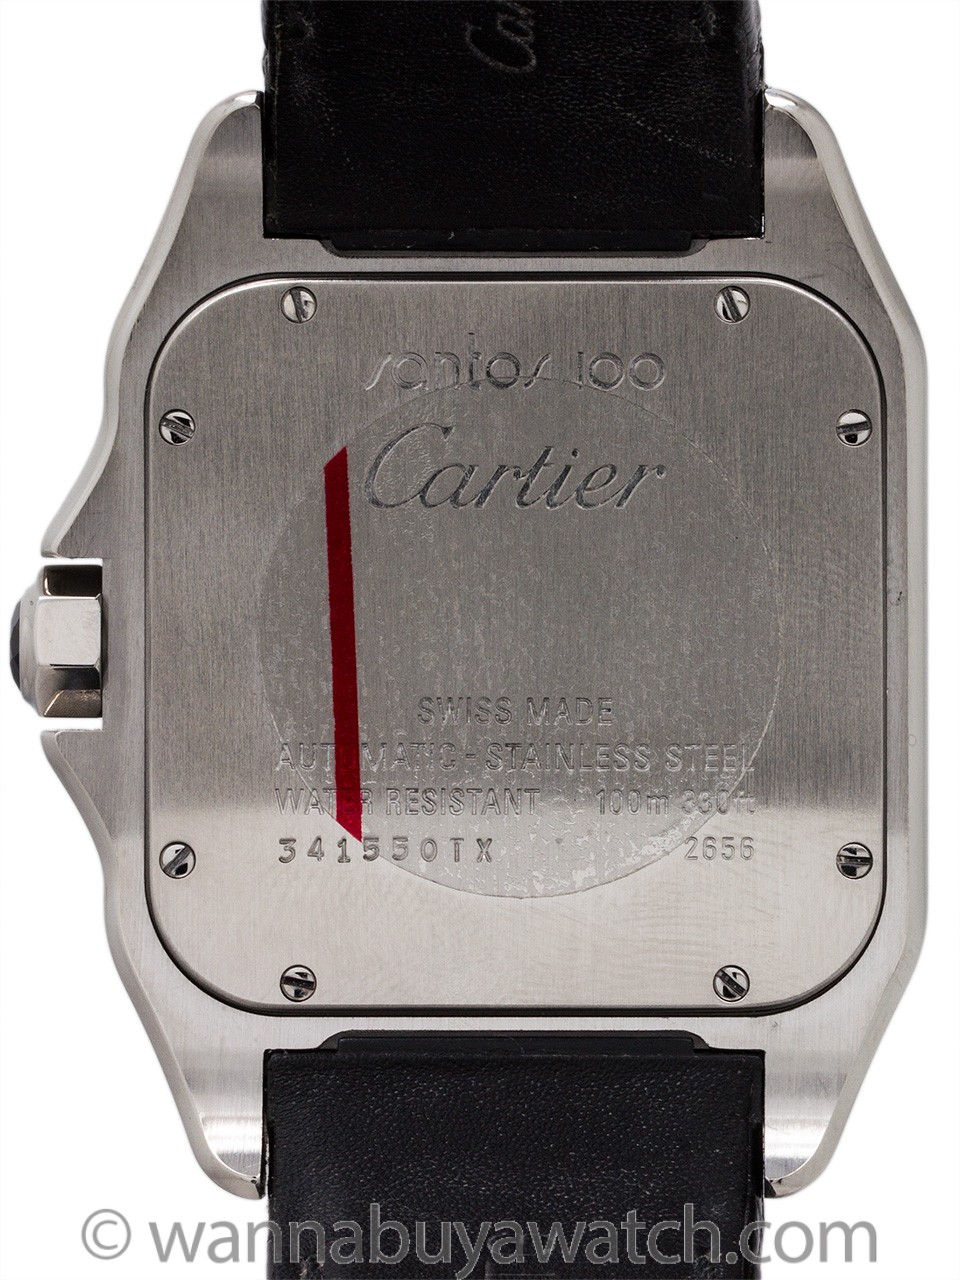 Cartier Santos 100 Stainless Steel ref 2656 Strap and Deployment with Box